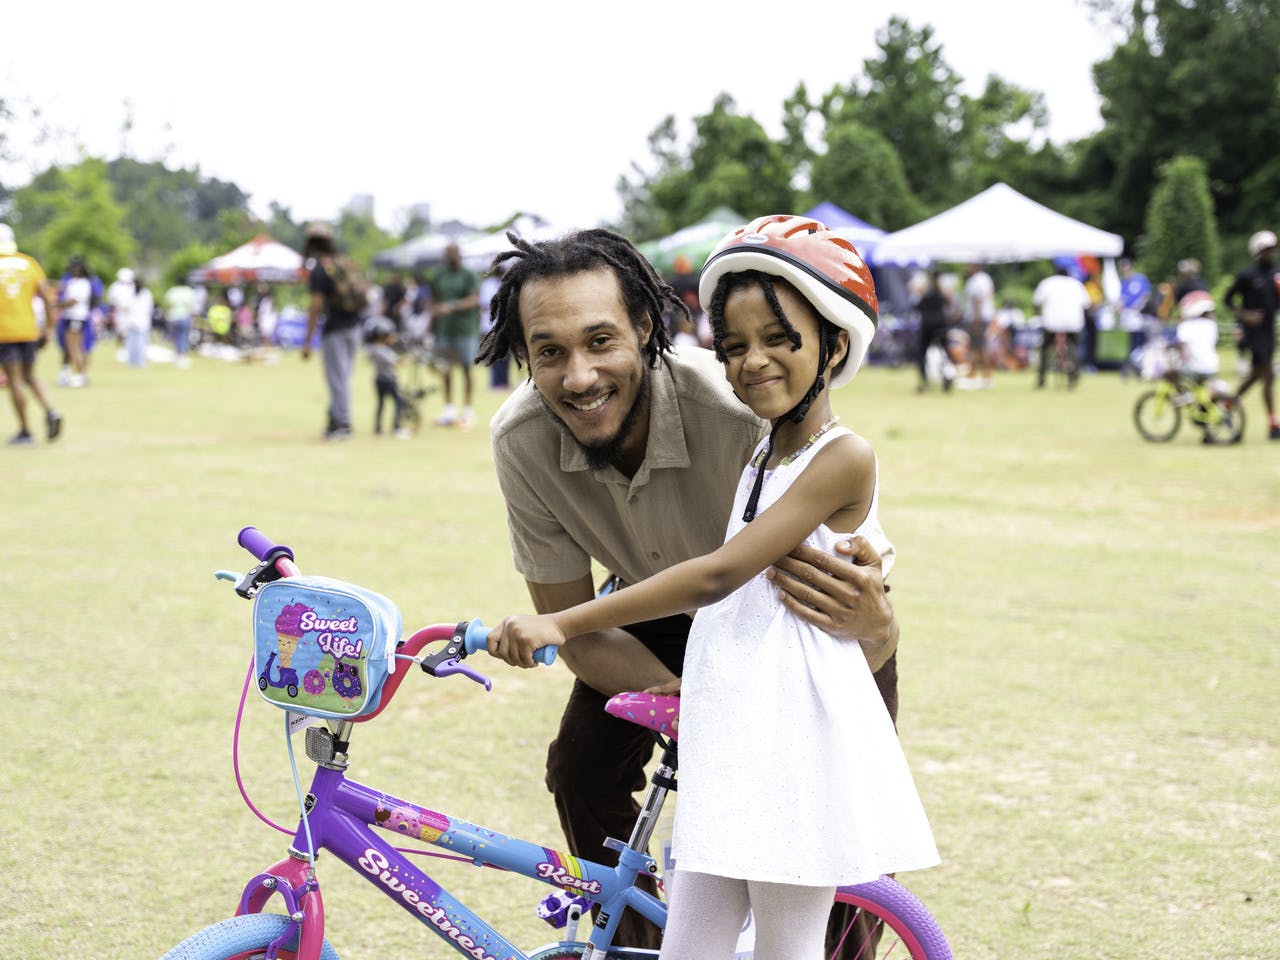 A man and a young girl stand smiling next to a bike.